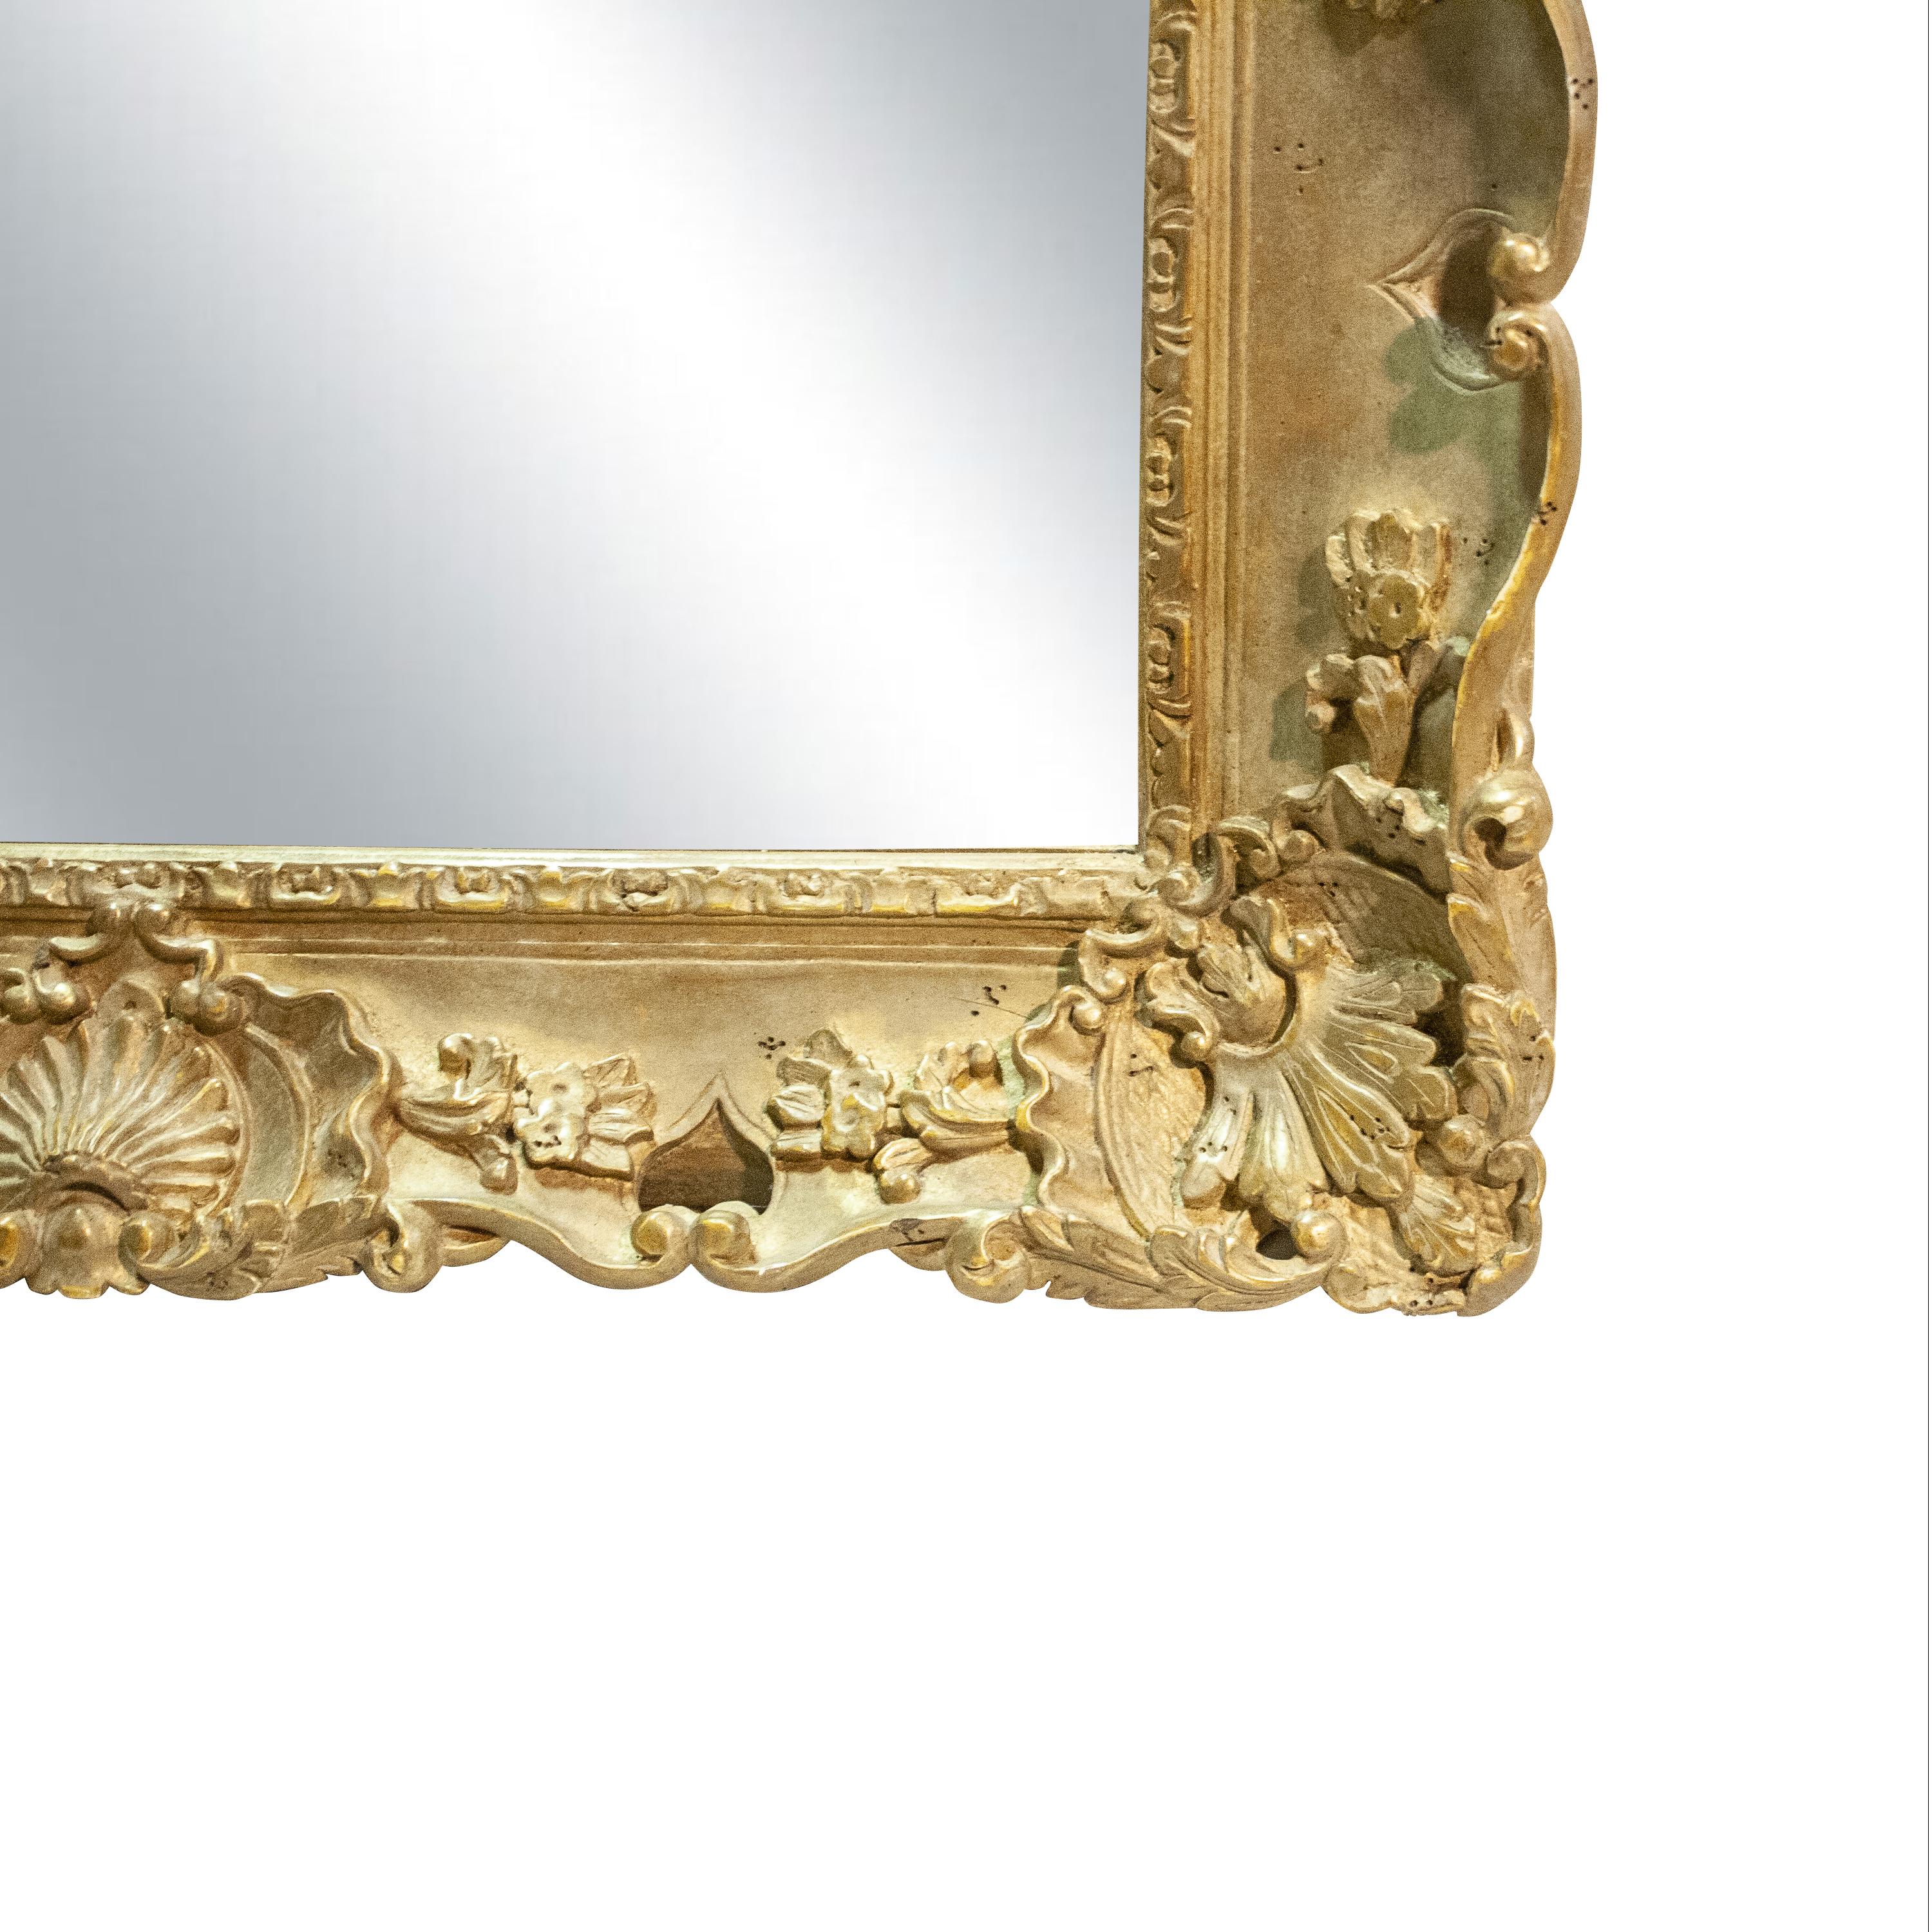 Handcrafted carved Regency Style wood mirror covered in gold foil.